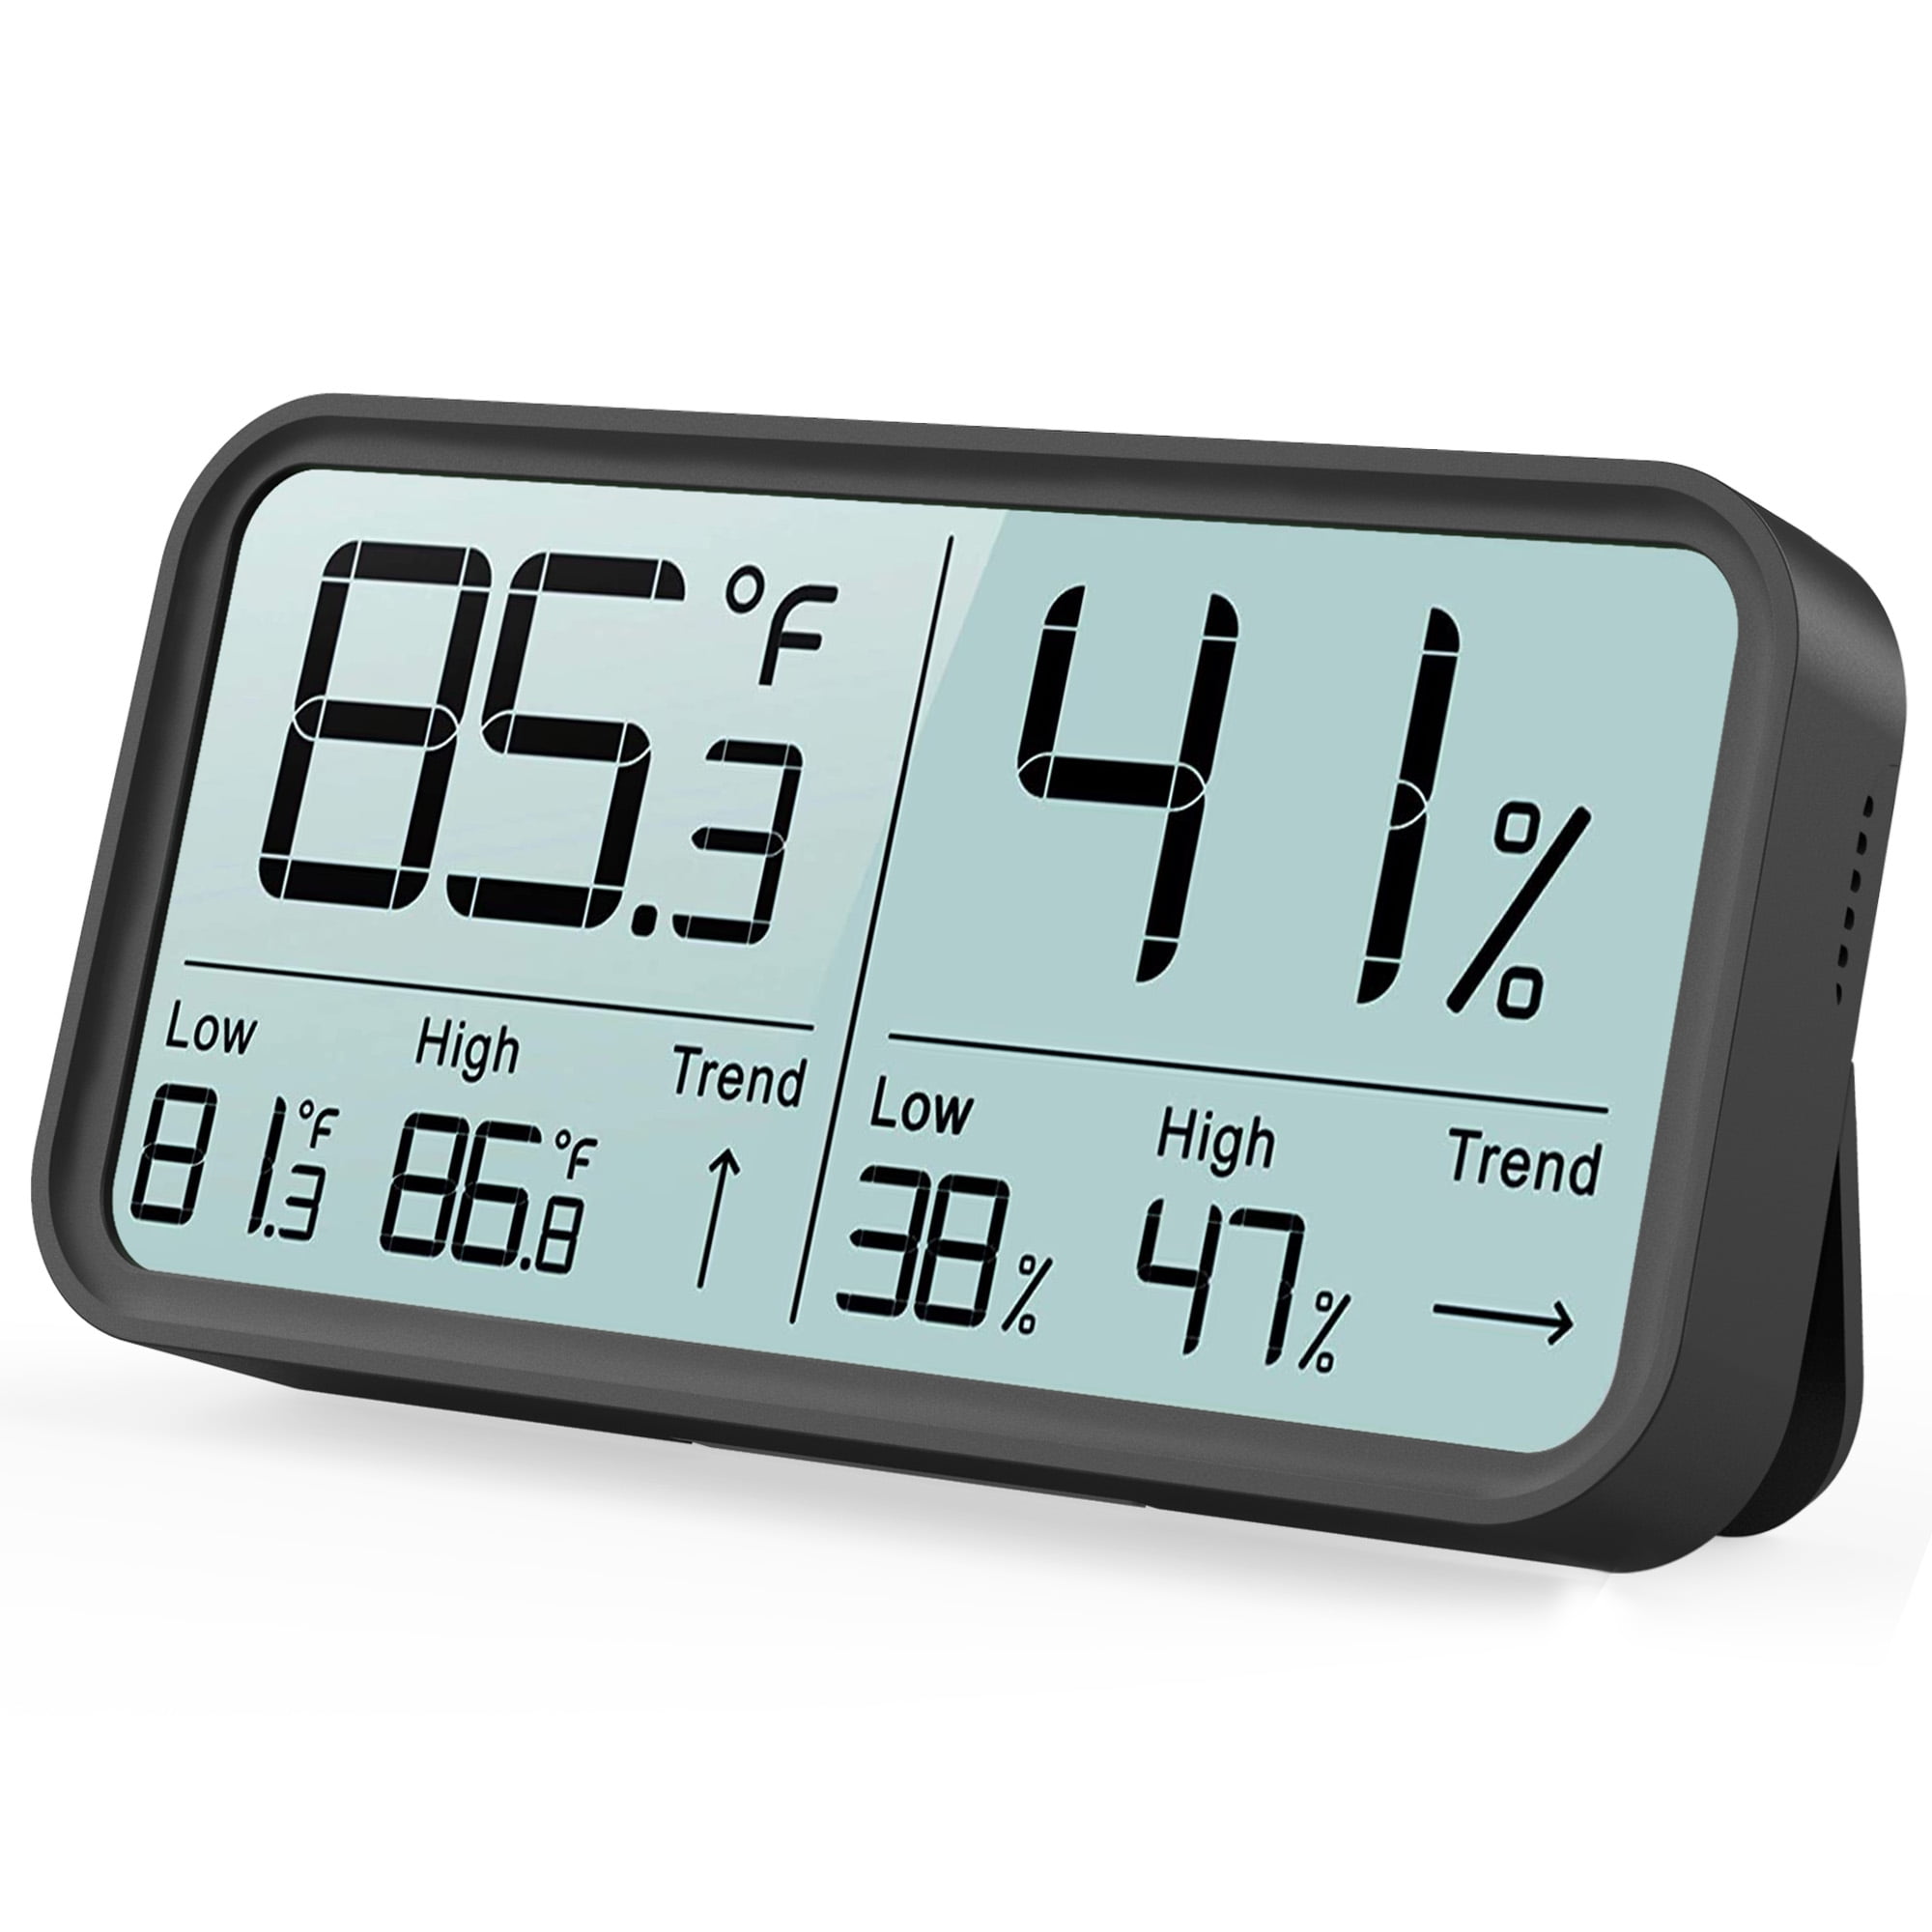 Bfour Digital LCD Hygrometer Indoor Thermomete, Room Temperature Humidity  Meter for Home, Office, White